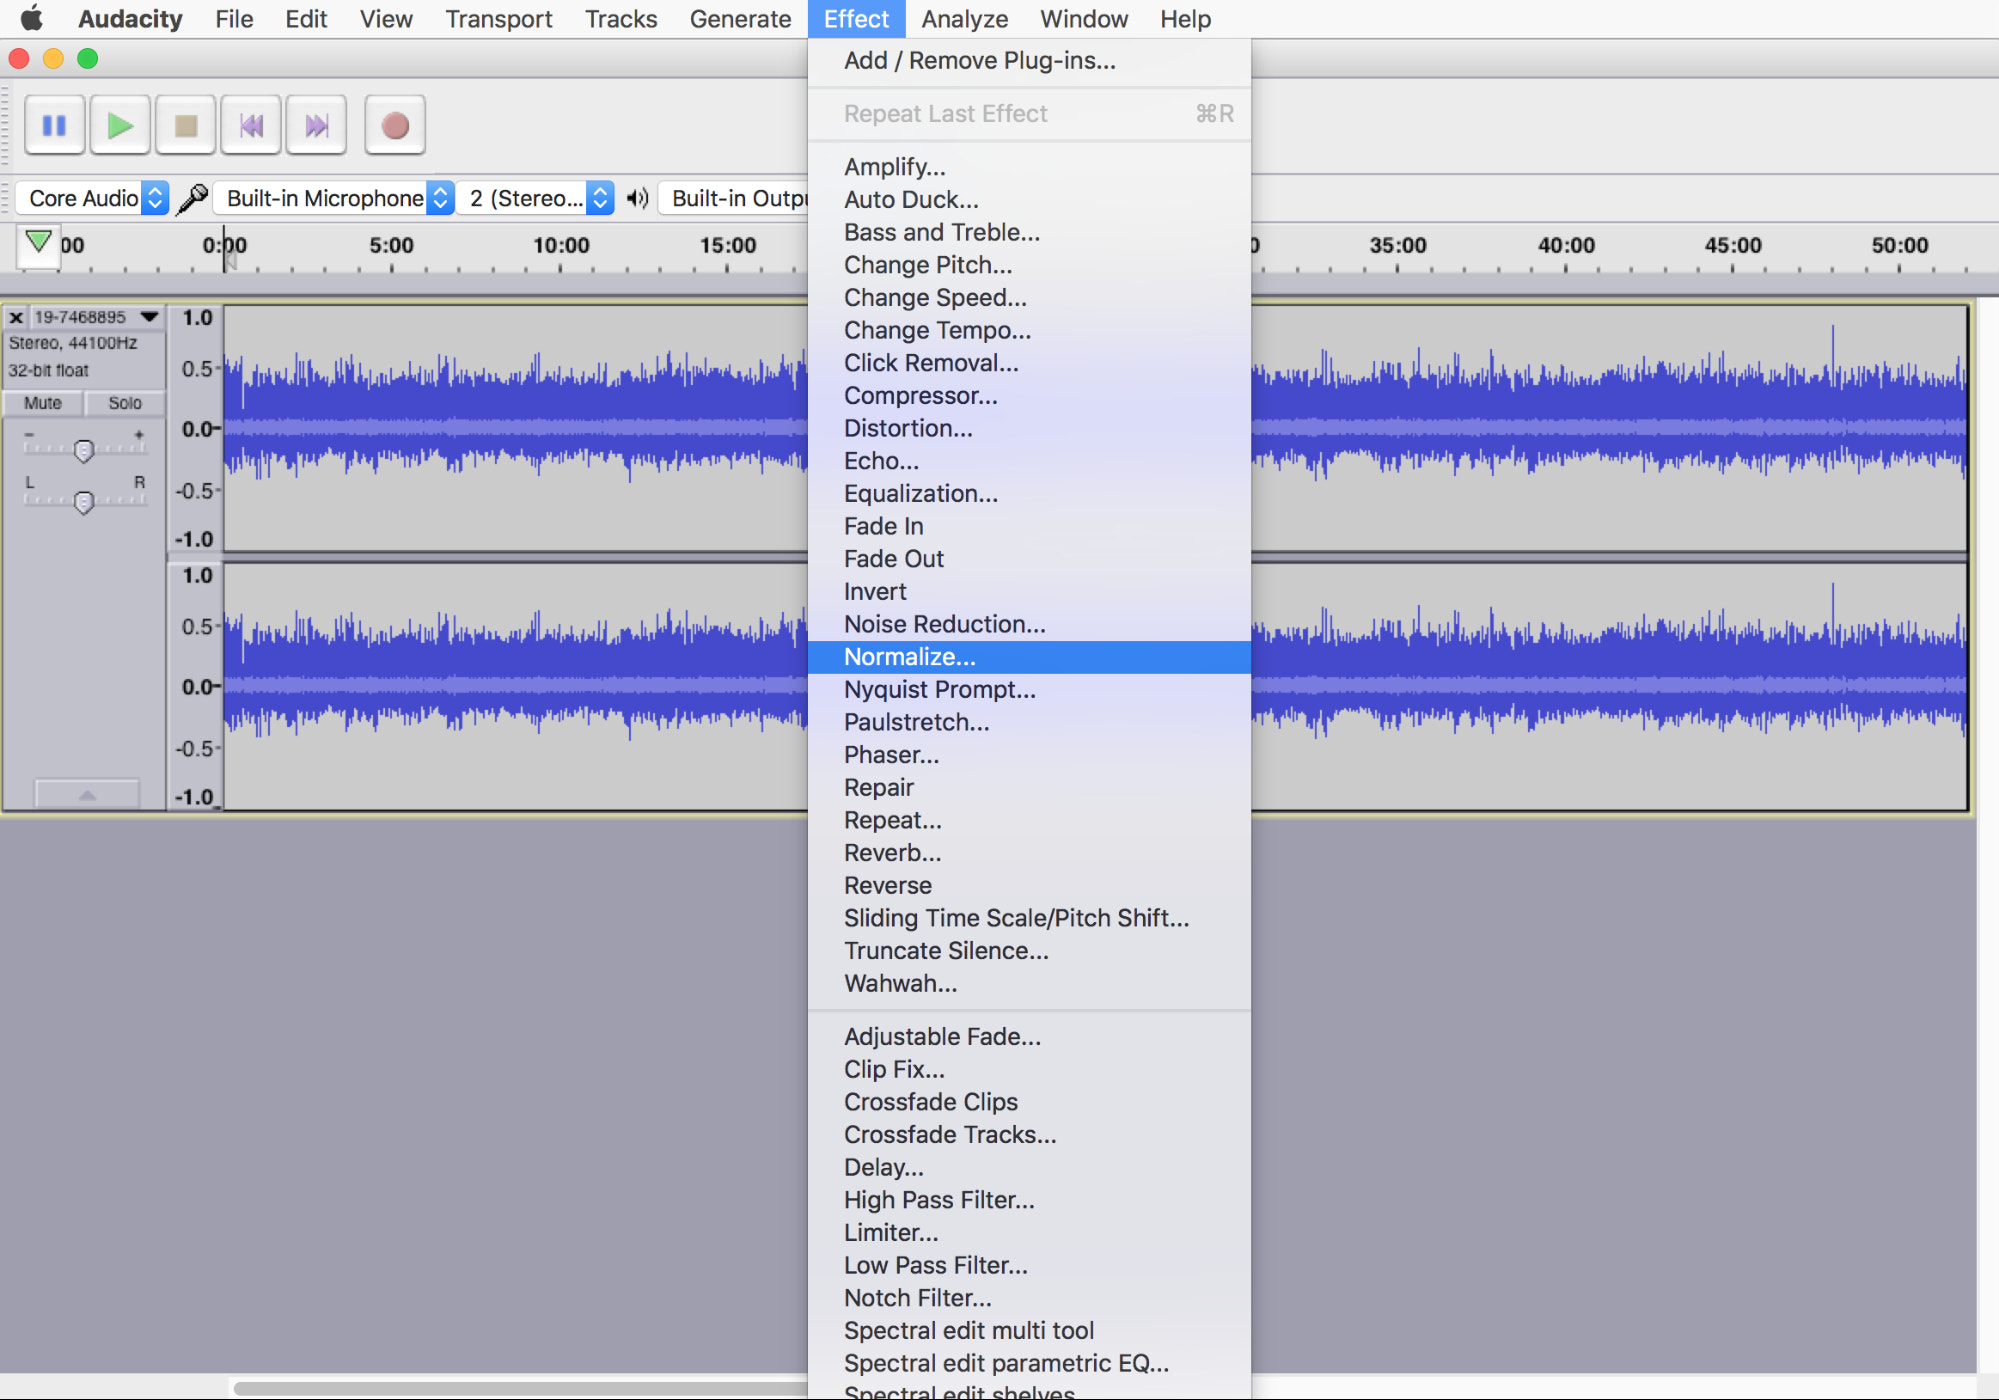 How To Start A Podcast Launch A Successful Podcast For Under 100 - in your audio editor of choice look for s!   ettings that stabilize the volume automatically so there aren t spikes of high volume headphone listeners will